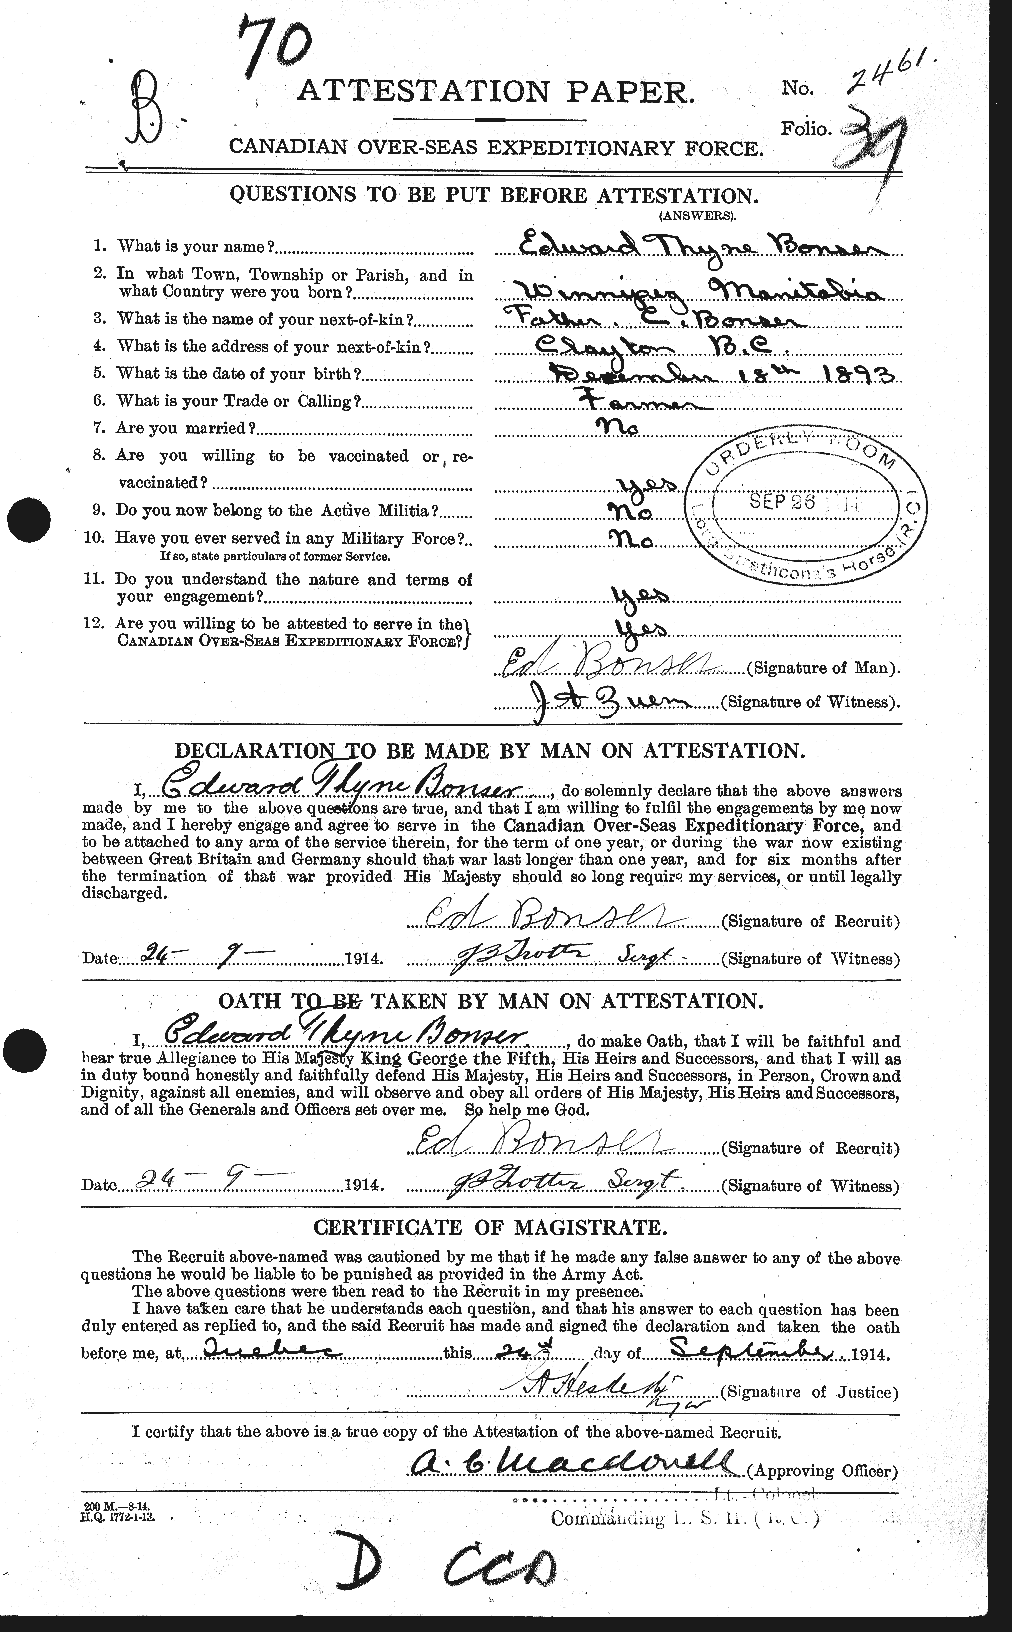 Personnel Records of the First World War - CEF 251162a